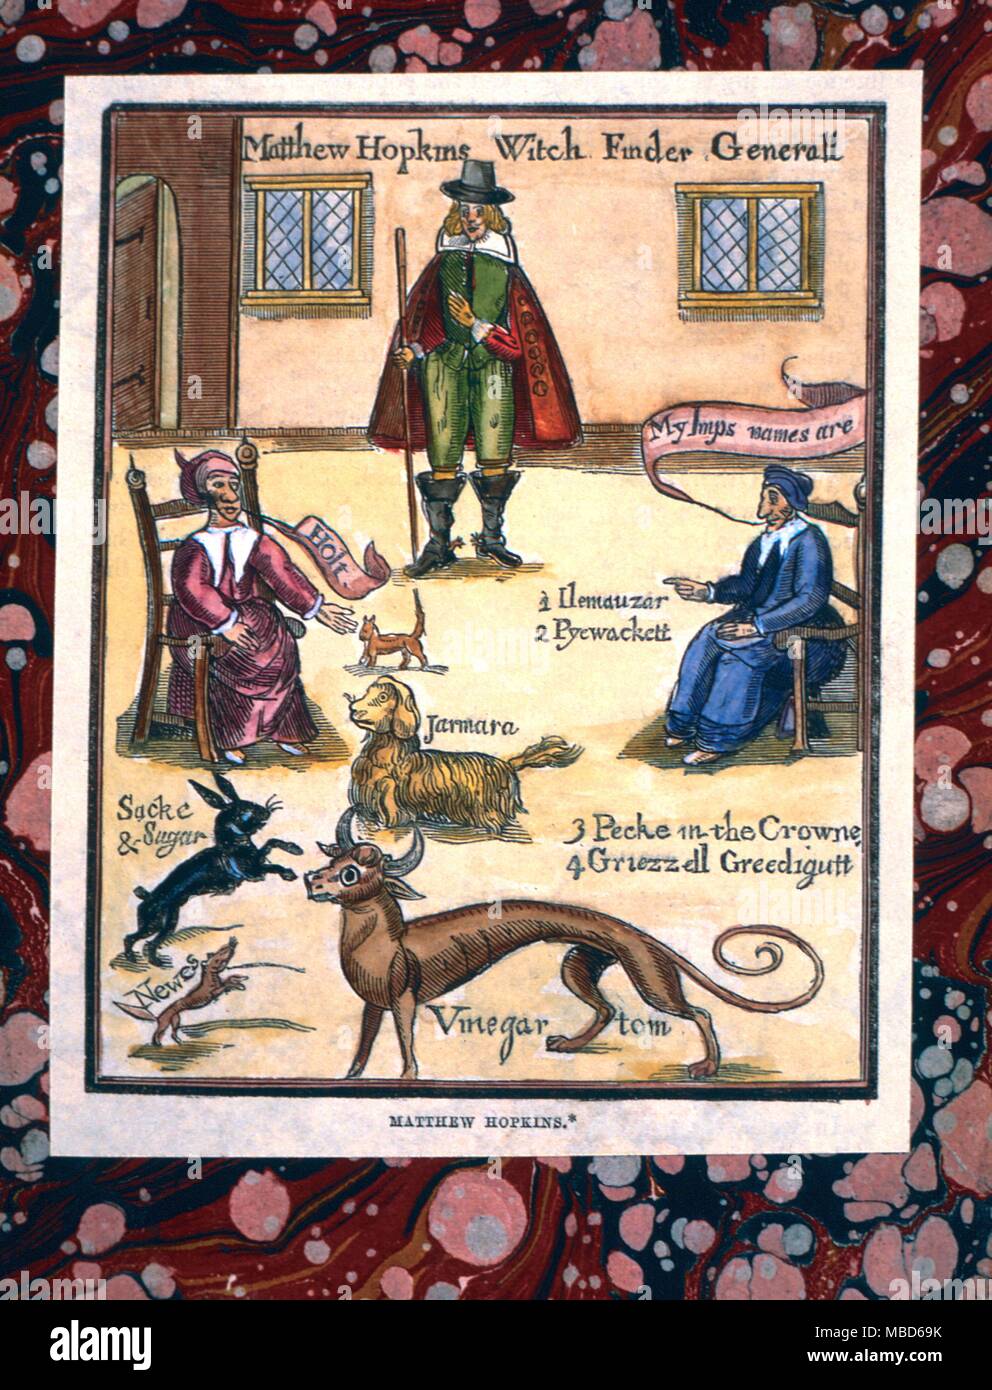 Animals - rabbit and dog familiars - frontispiece to Matthew Hopkin's Discovery of Witches, 1647. Hopkins was the self-styled Witchfinder General, depicted here with two of his witch victims, and surrounded by their imps or familiars. - © / Charles Walker Frontispiece to Hopkins' 'Discovery of Wiches (sic)', 1647. Hopkins was the self-styled 'Witchfinder General' - he is depicted here with two of his victims, and their named imps or familiars Stock Photo